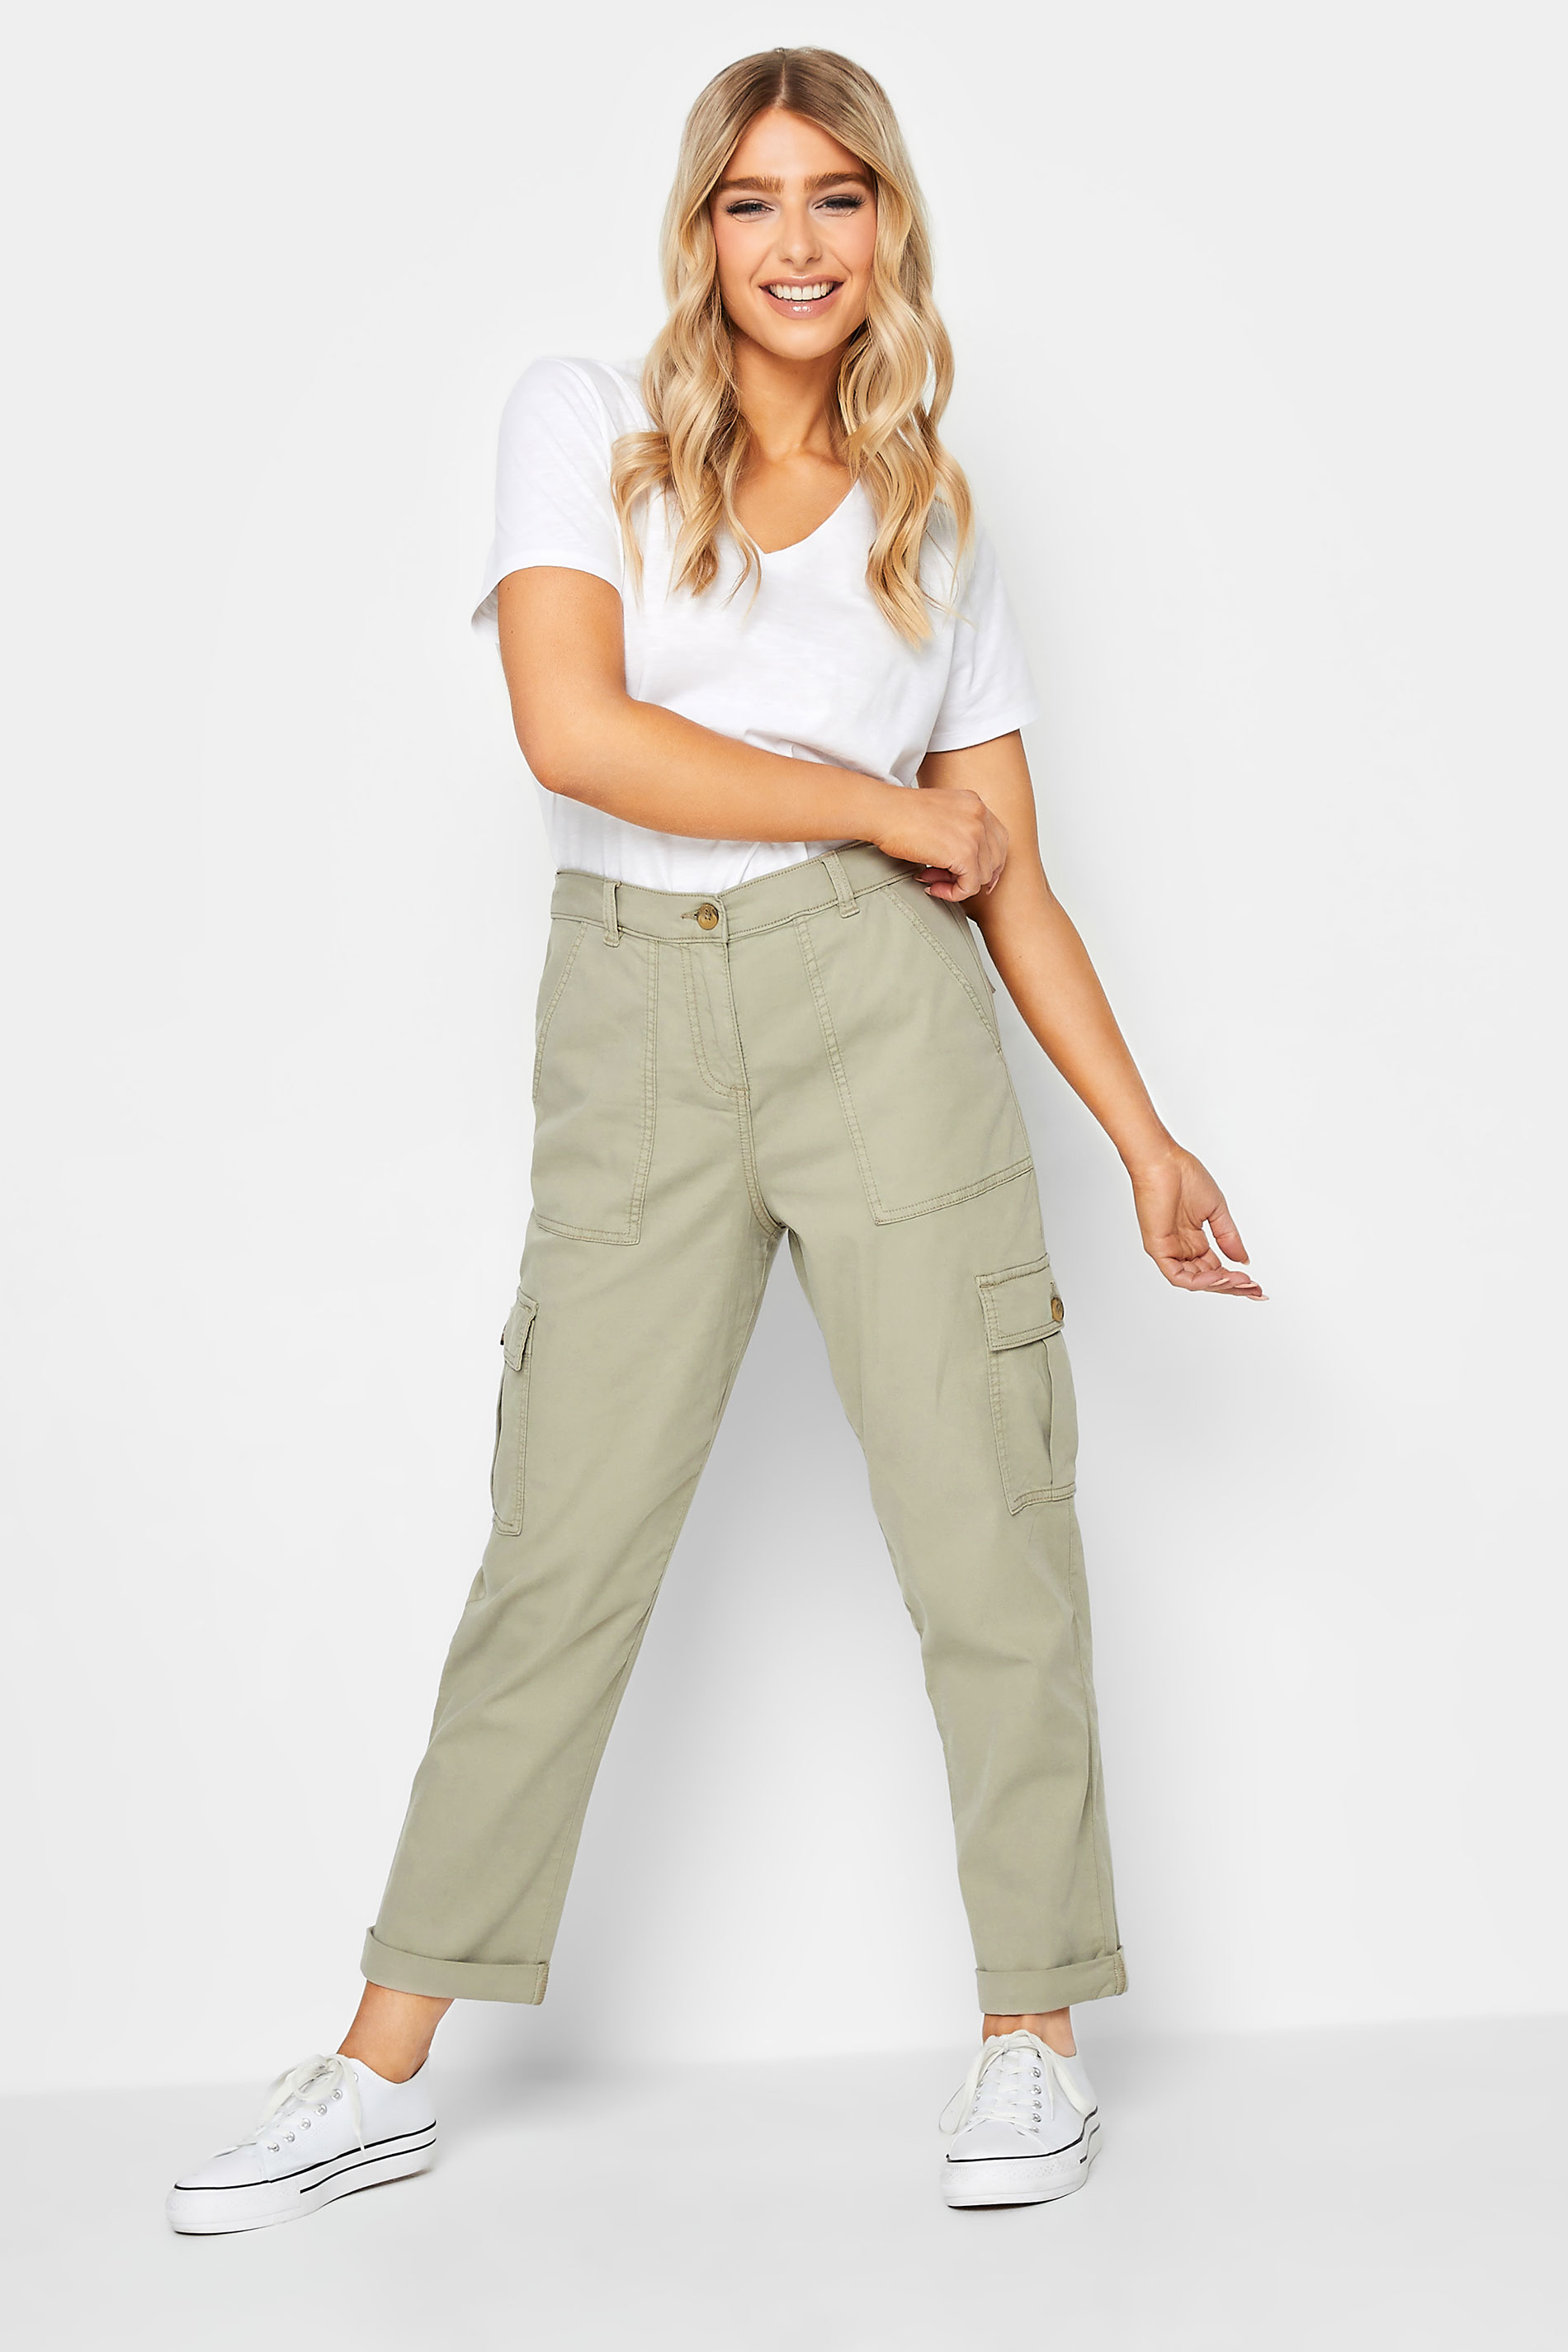 M&Co Sage Green Cargo Trousers | M&Co 3